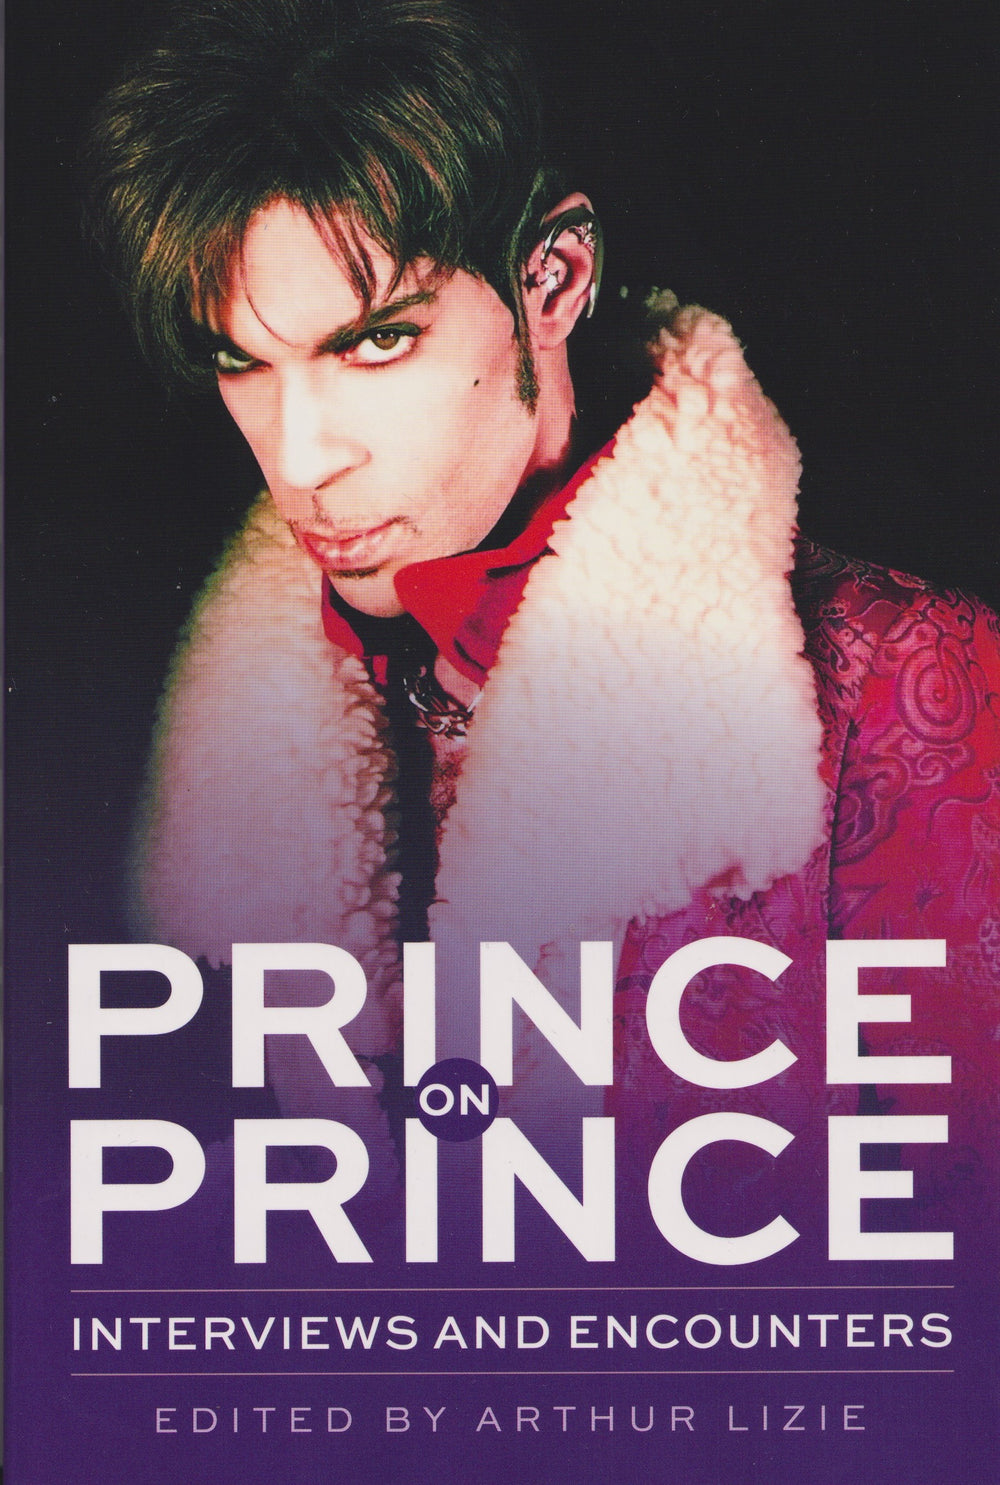 Prince – On Prince Interviews & Encounters Softbacked Book NEW: 2022